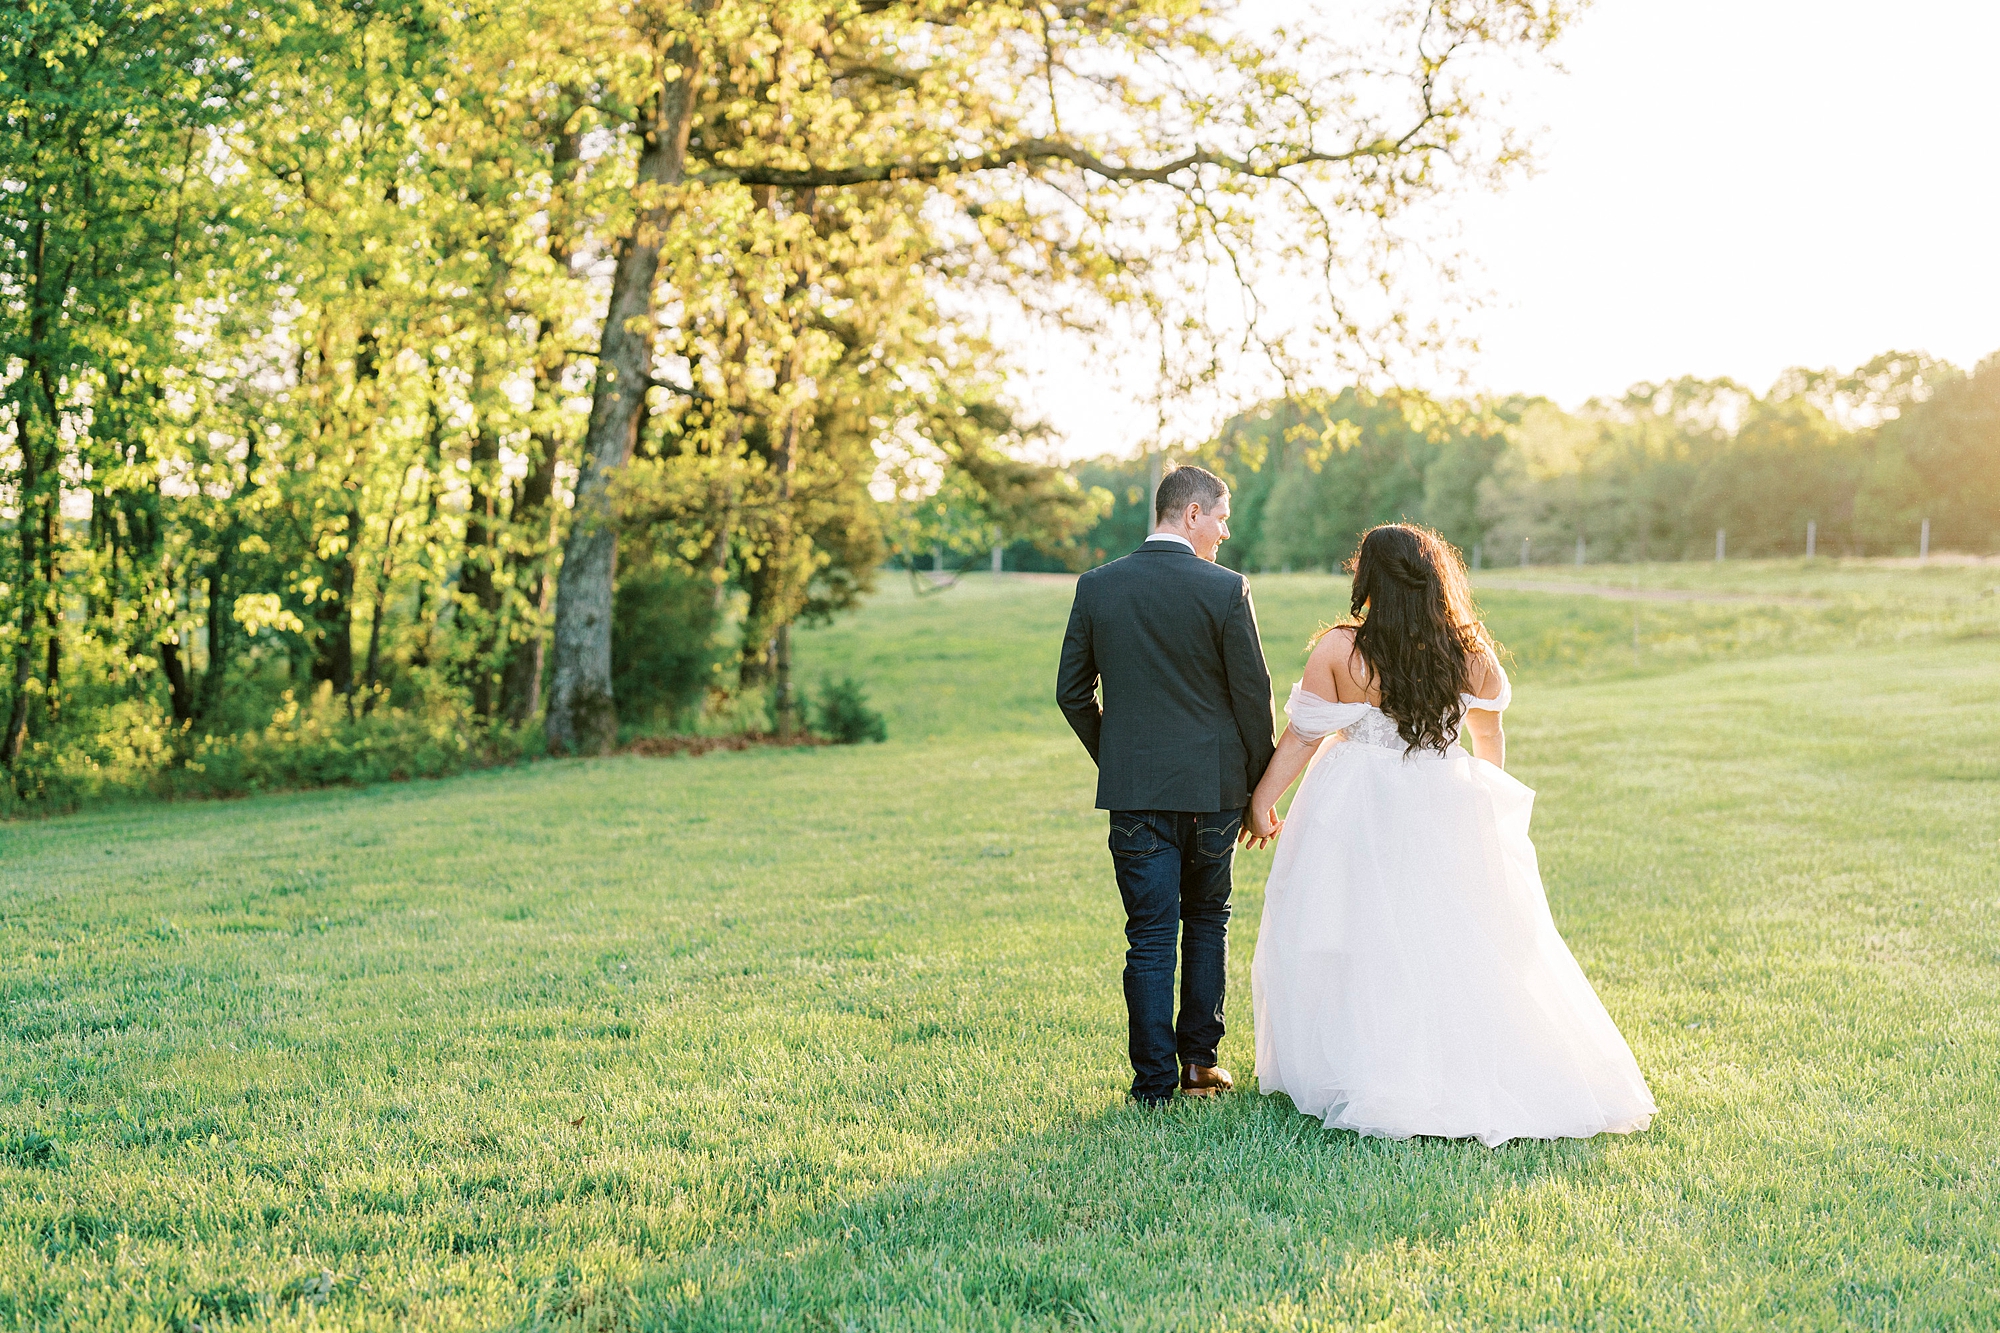 newlyweds walk away from photographer at sunset on lawn